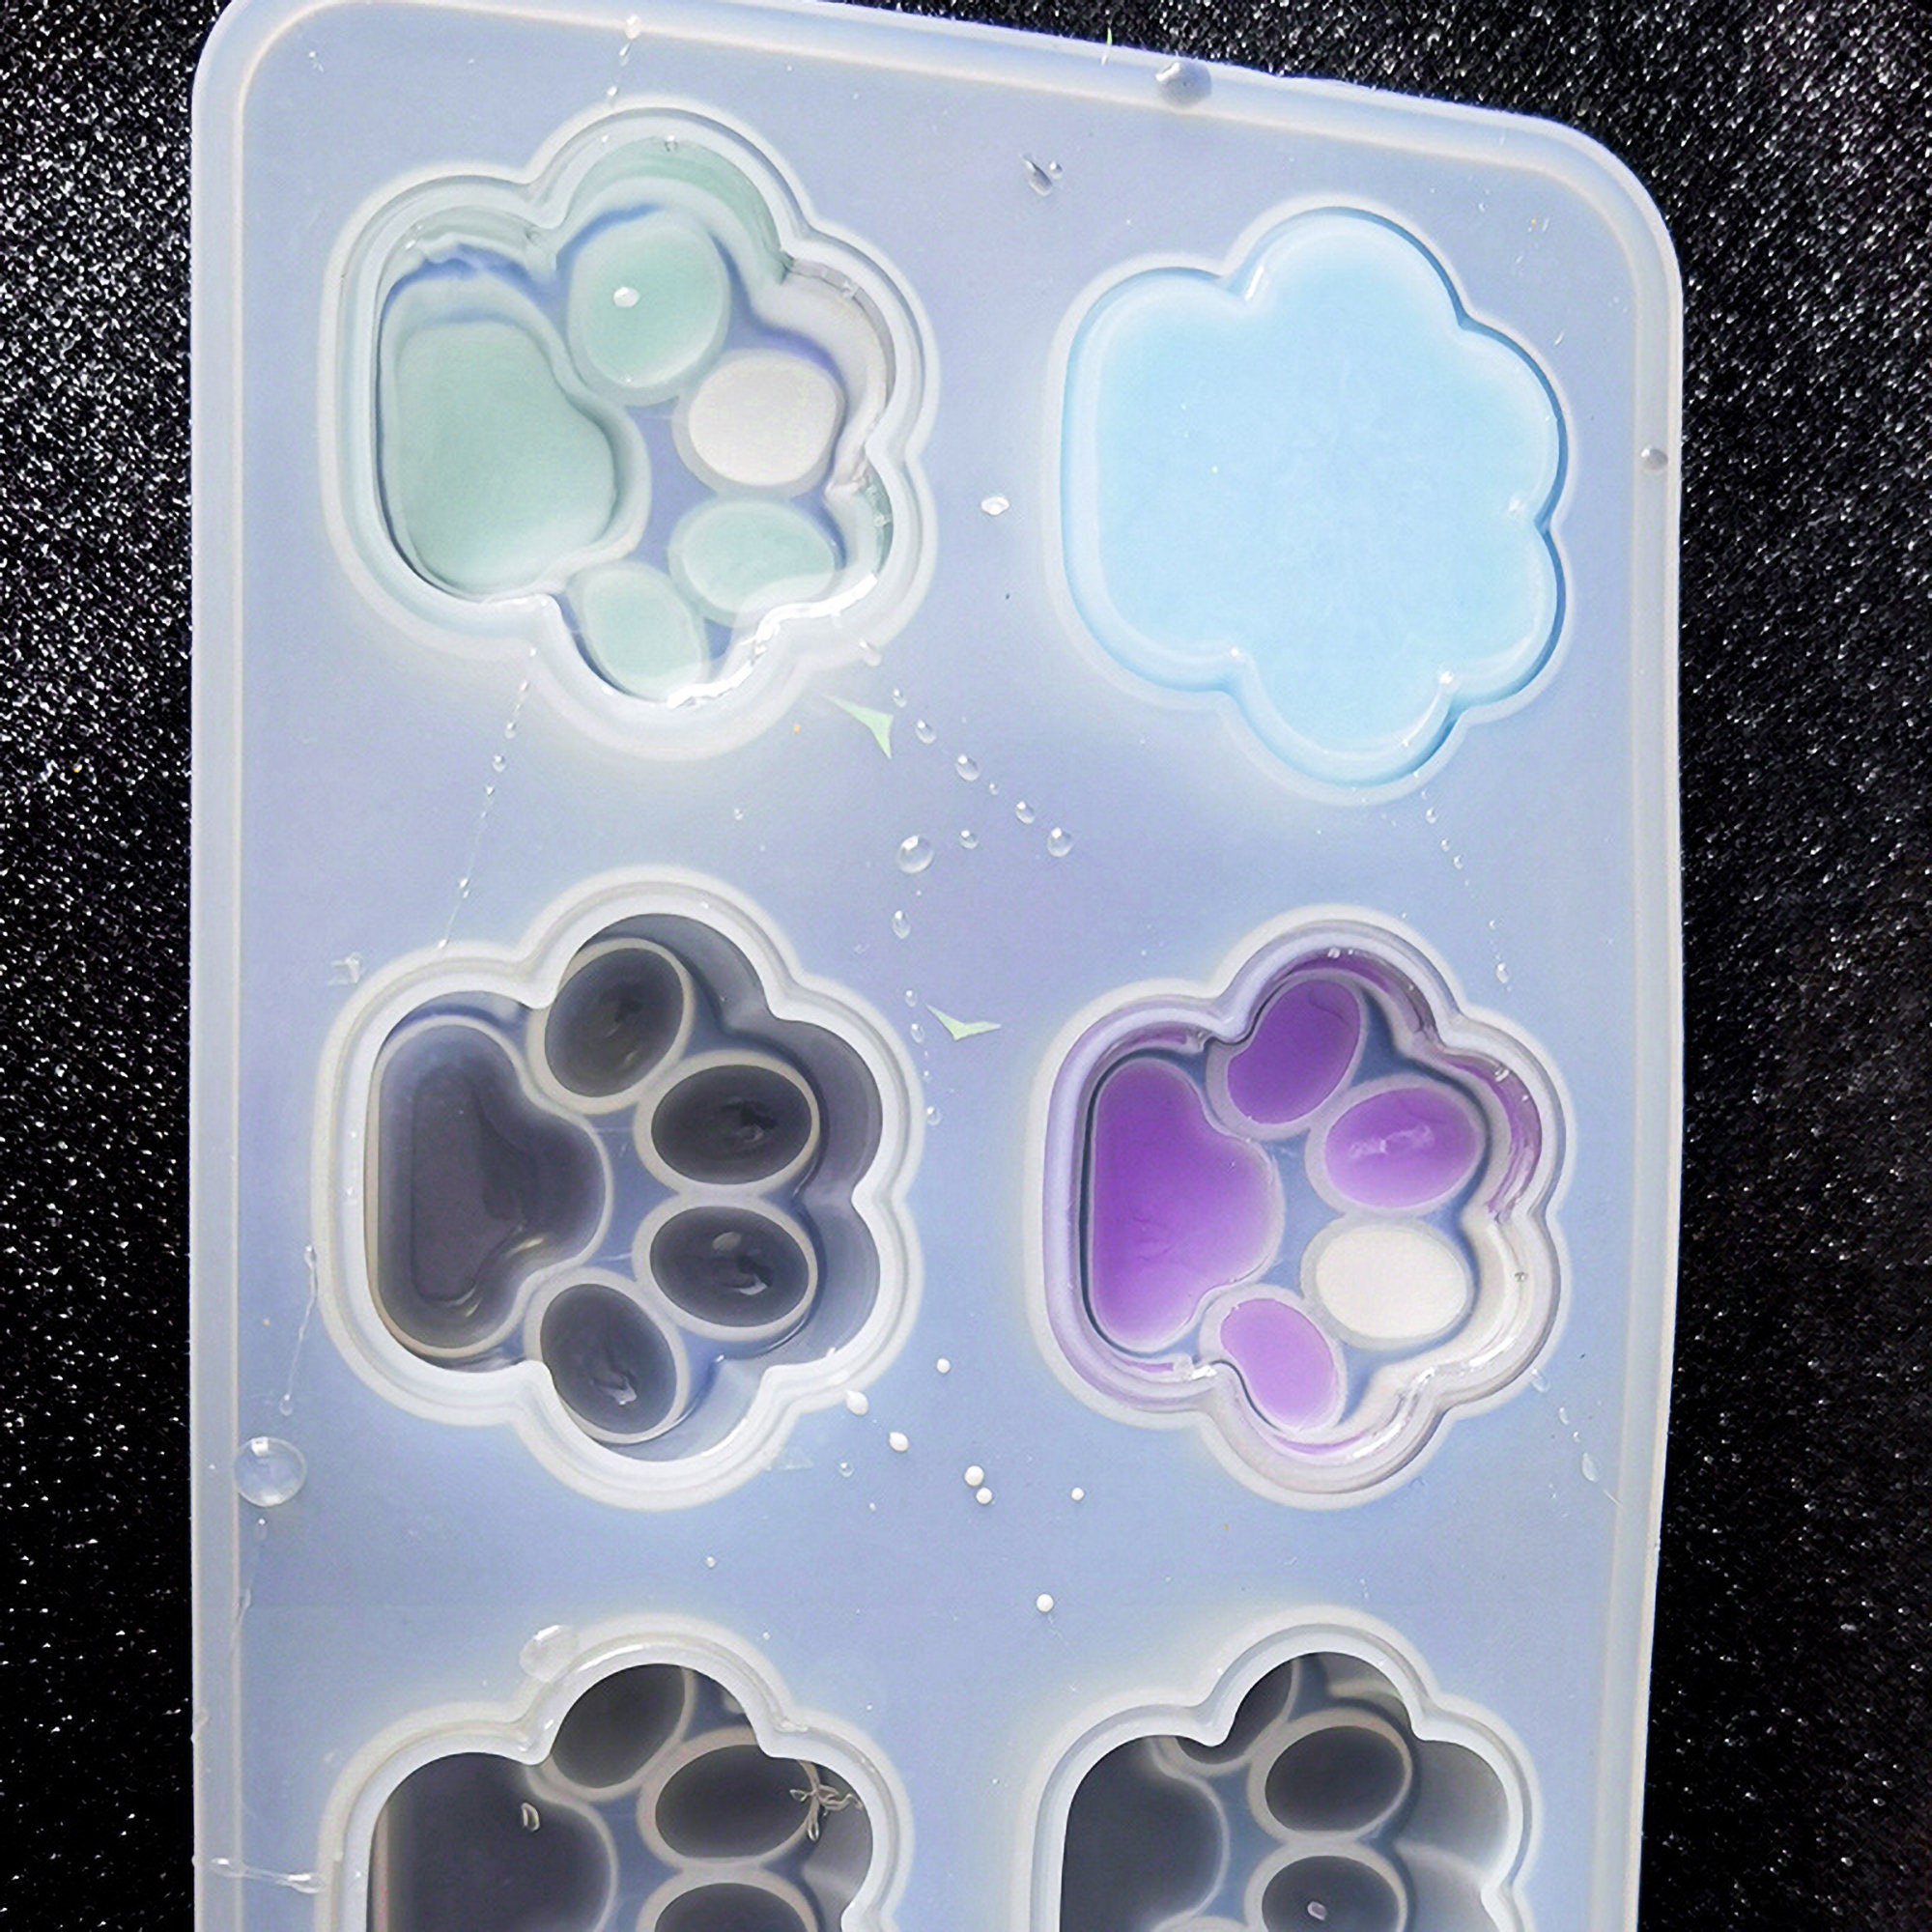  AMZTOART 3pc Glossy Resin Silicone Paw Print Molds DIY Making  Keychain, Heart with Paw Cutout Epoxy Mold with 10PC Key  Ring(DY0129+DY0292+DY0404) : Arts, Crafts & Sewing